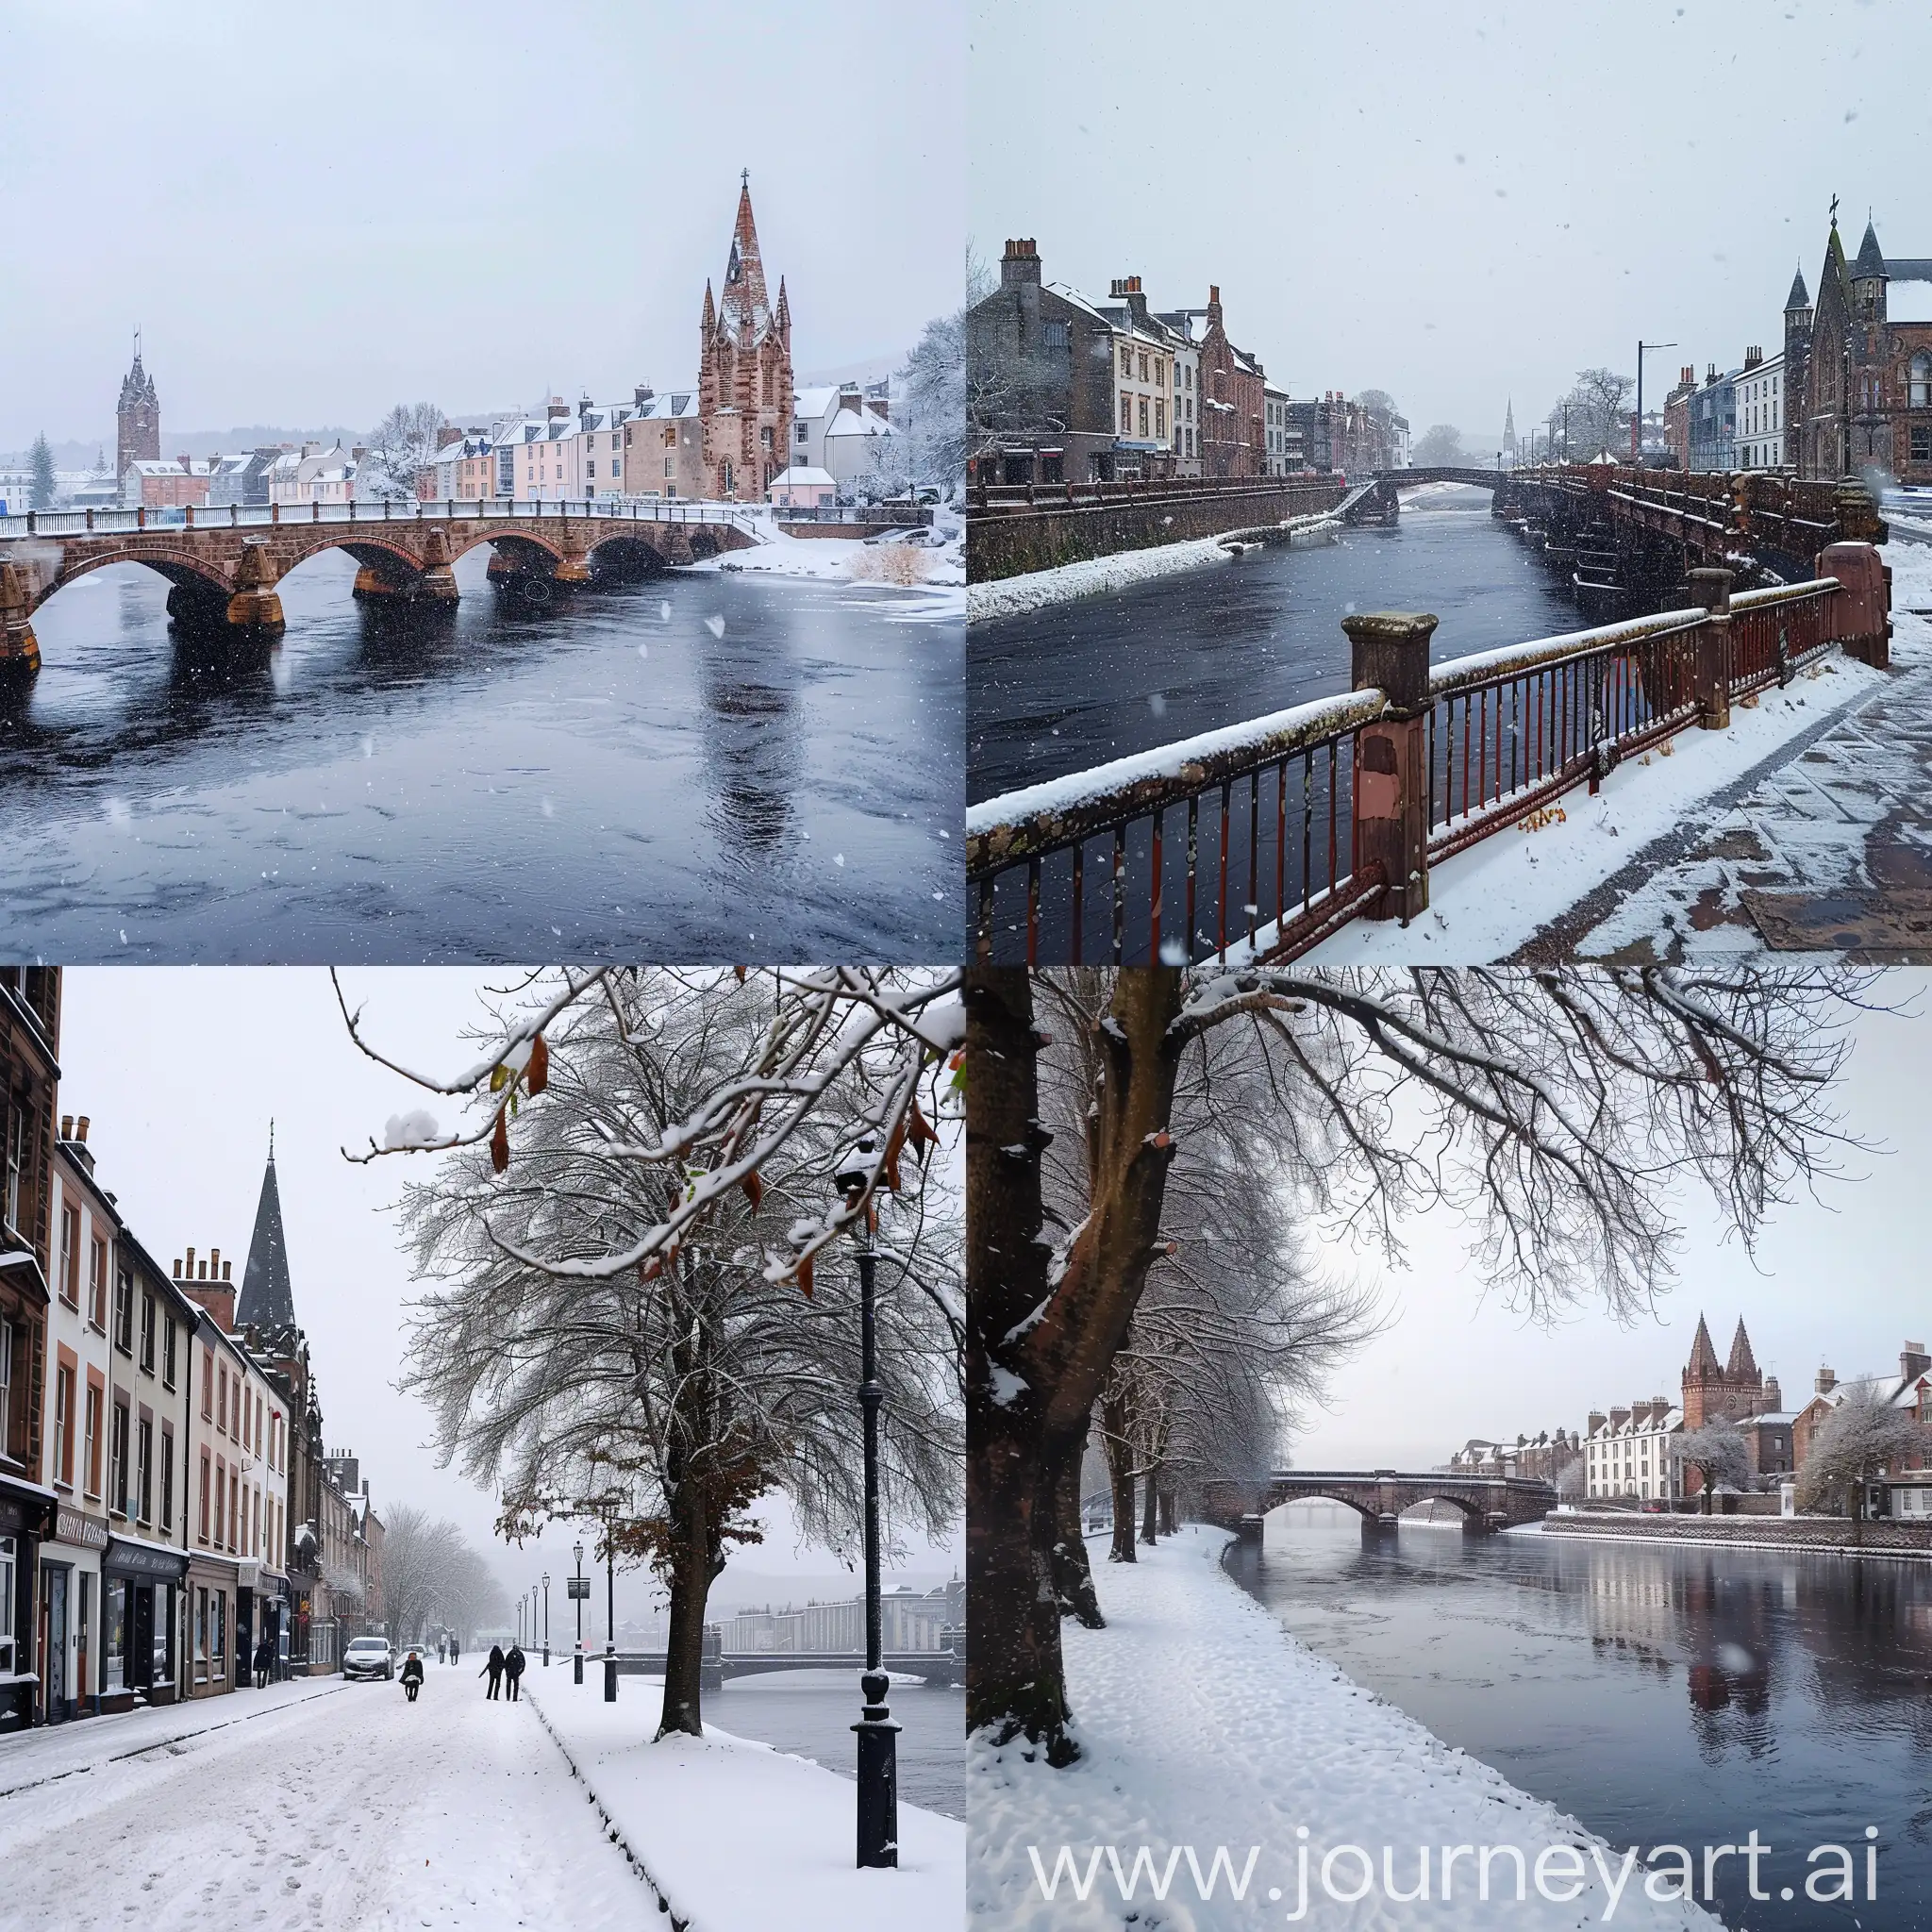 Snowy-Day-in-Inverness-Tranquil-Winter-Scene